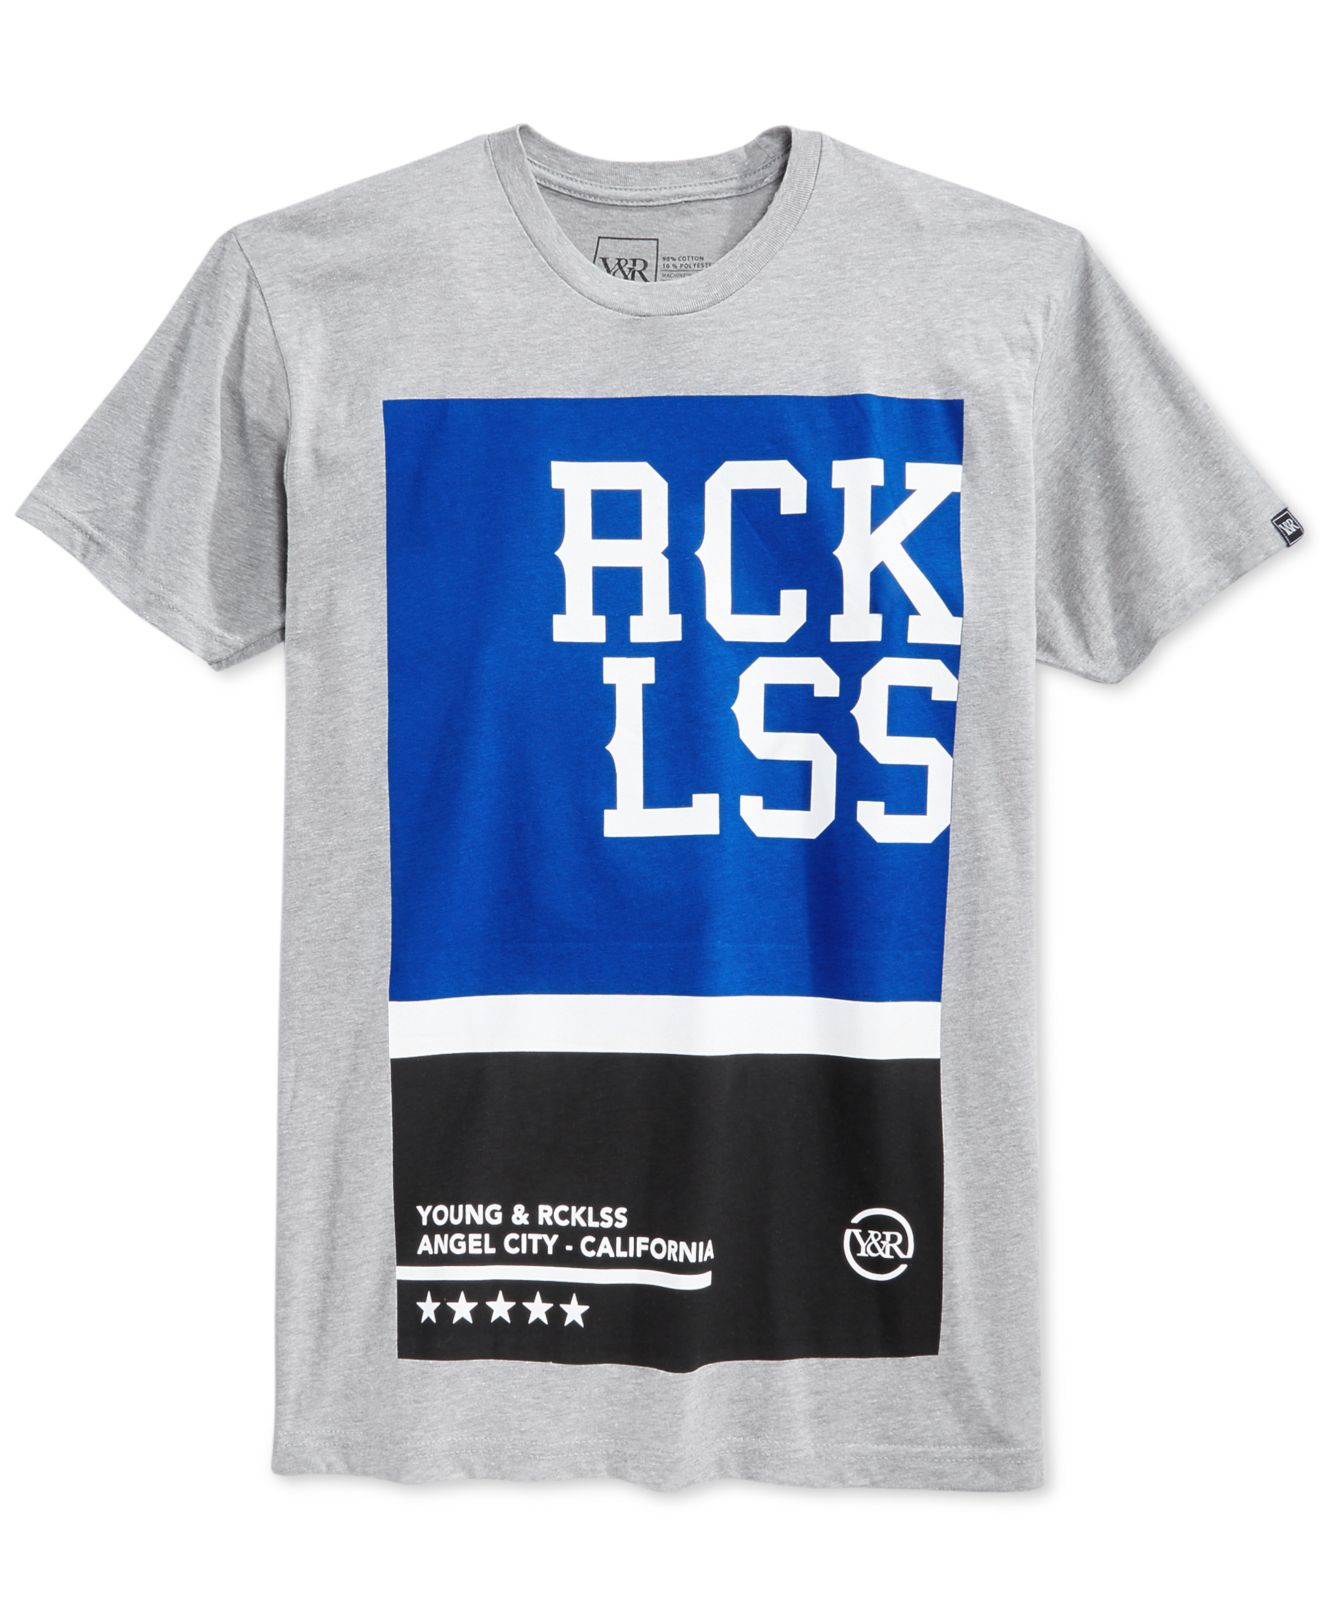 royal blue graphic tee